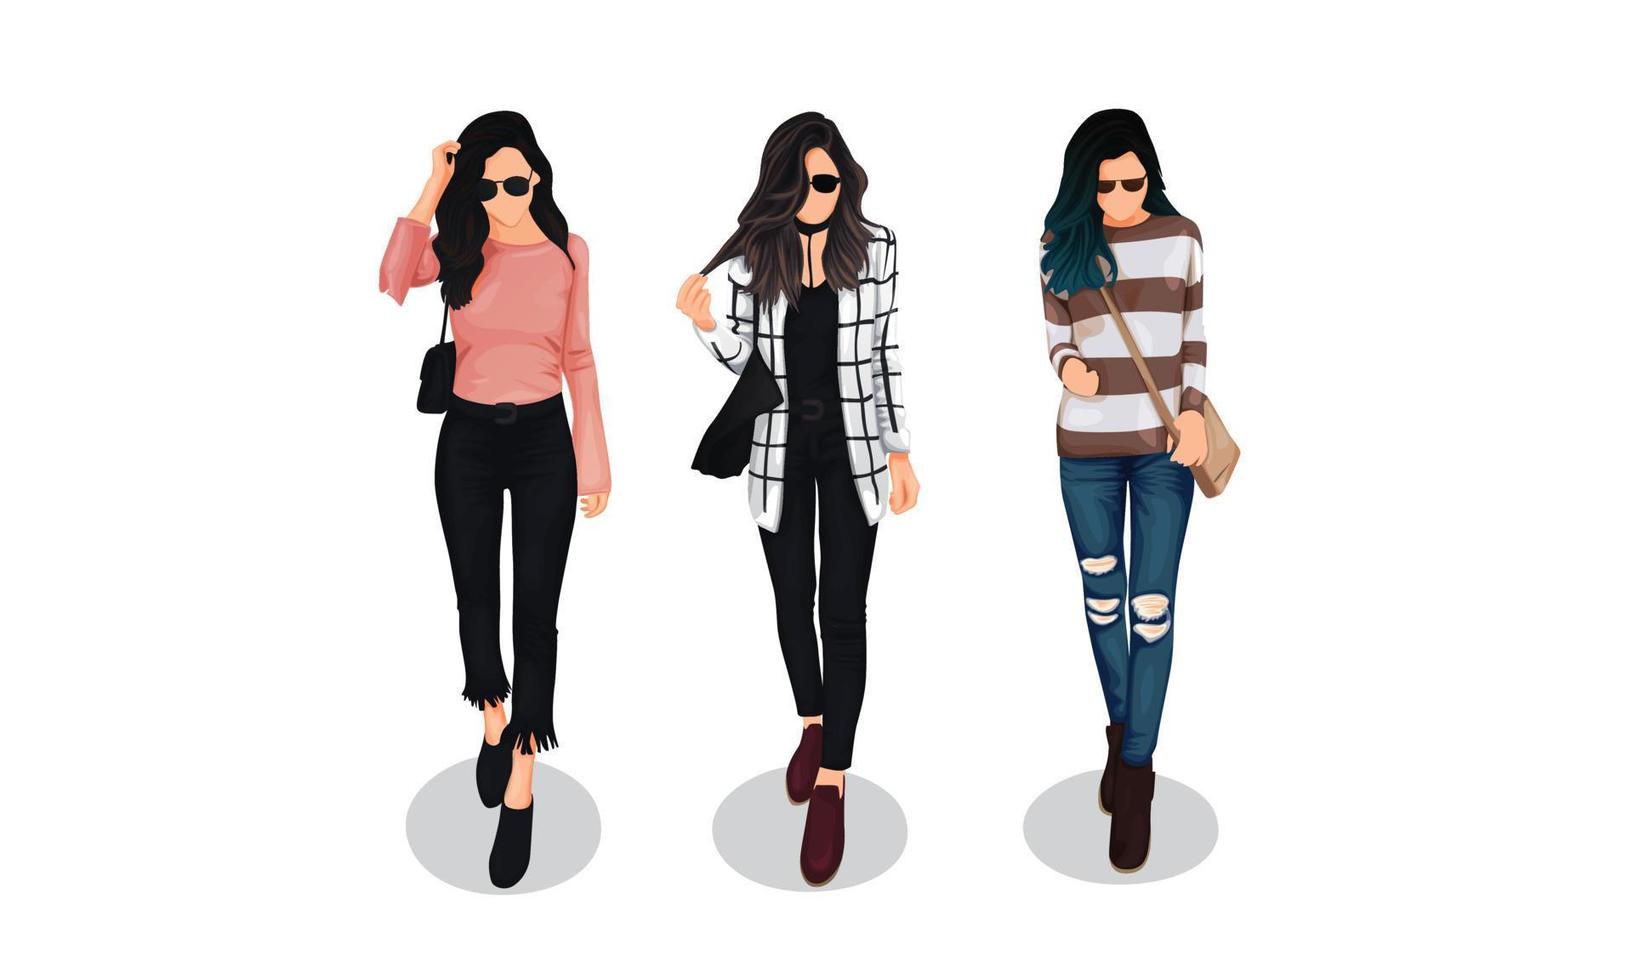 A Girl with curly ombre black hair uses comfort casual outfit like striped sweater, blazer, shirt, blue jeans, sneaker shoes, bag and sun glasses for a bright day vector